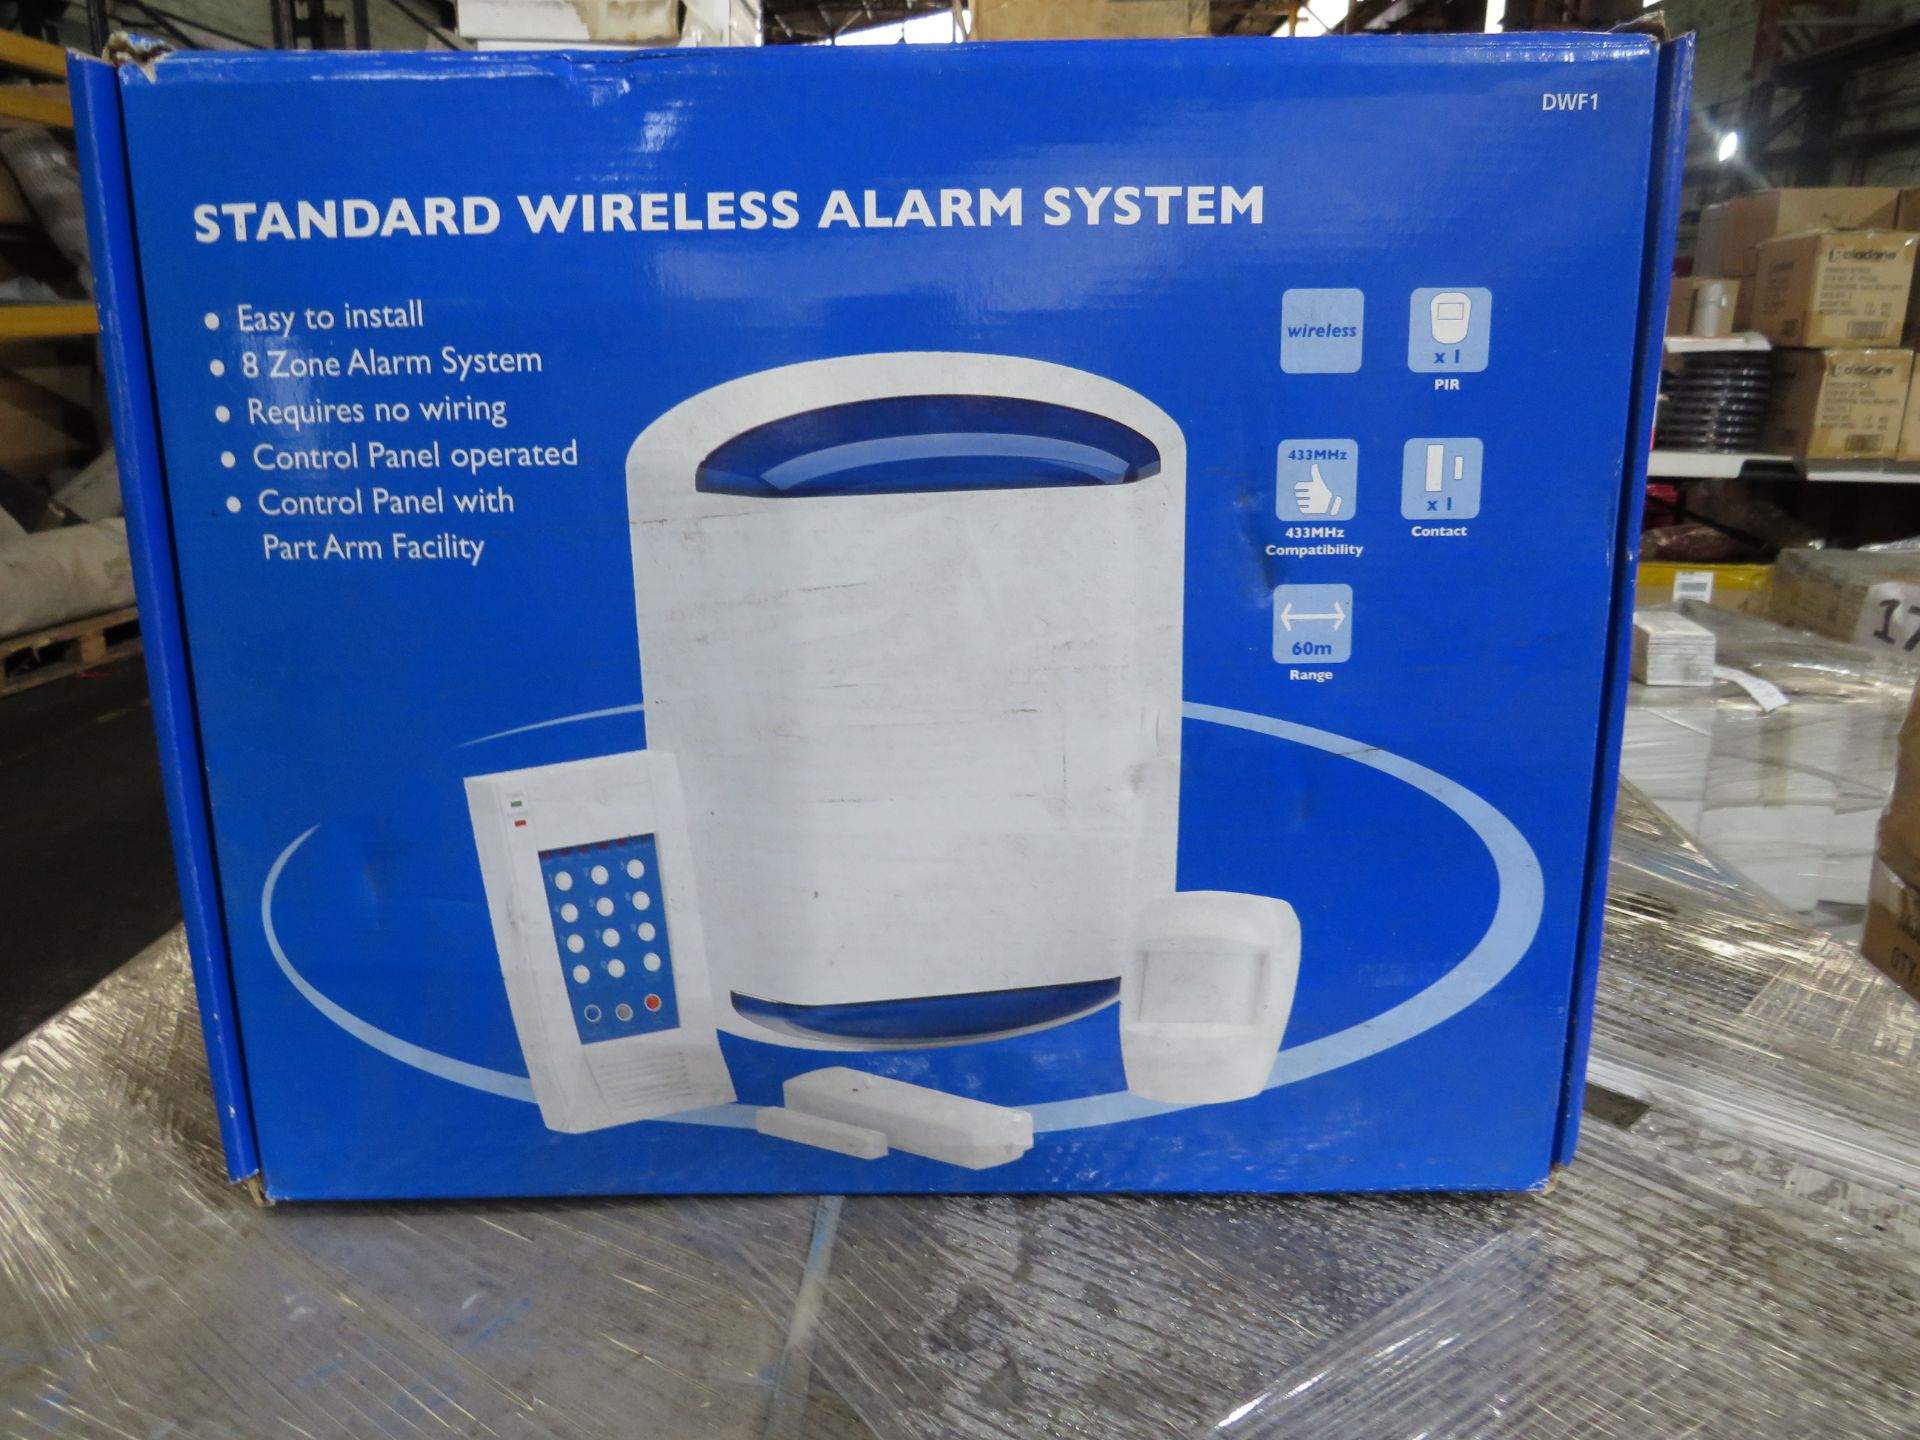 Friedland Standard wireless alarm system, still sealed in the box, the boxes are less than perfect